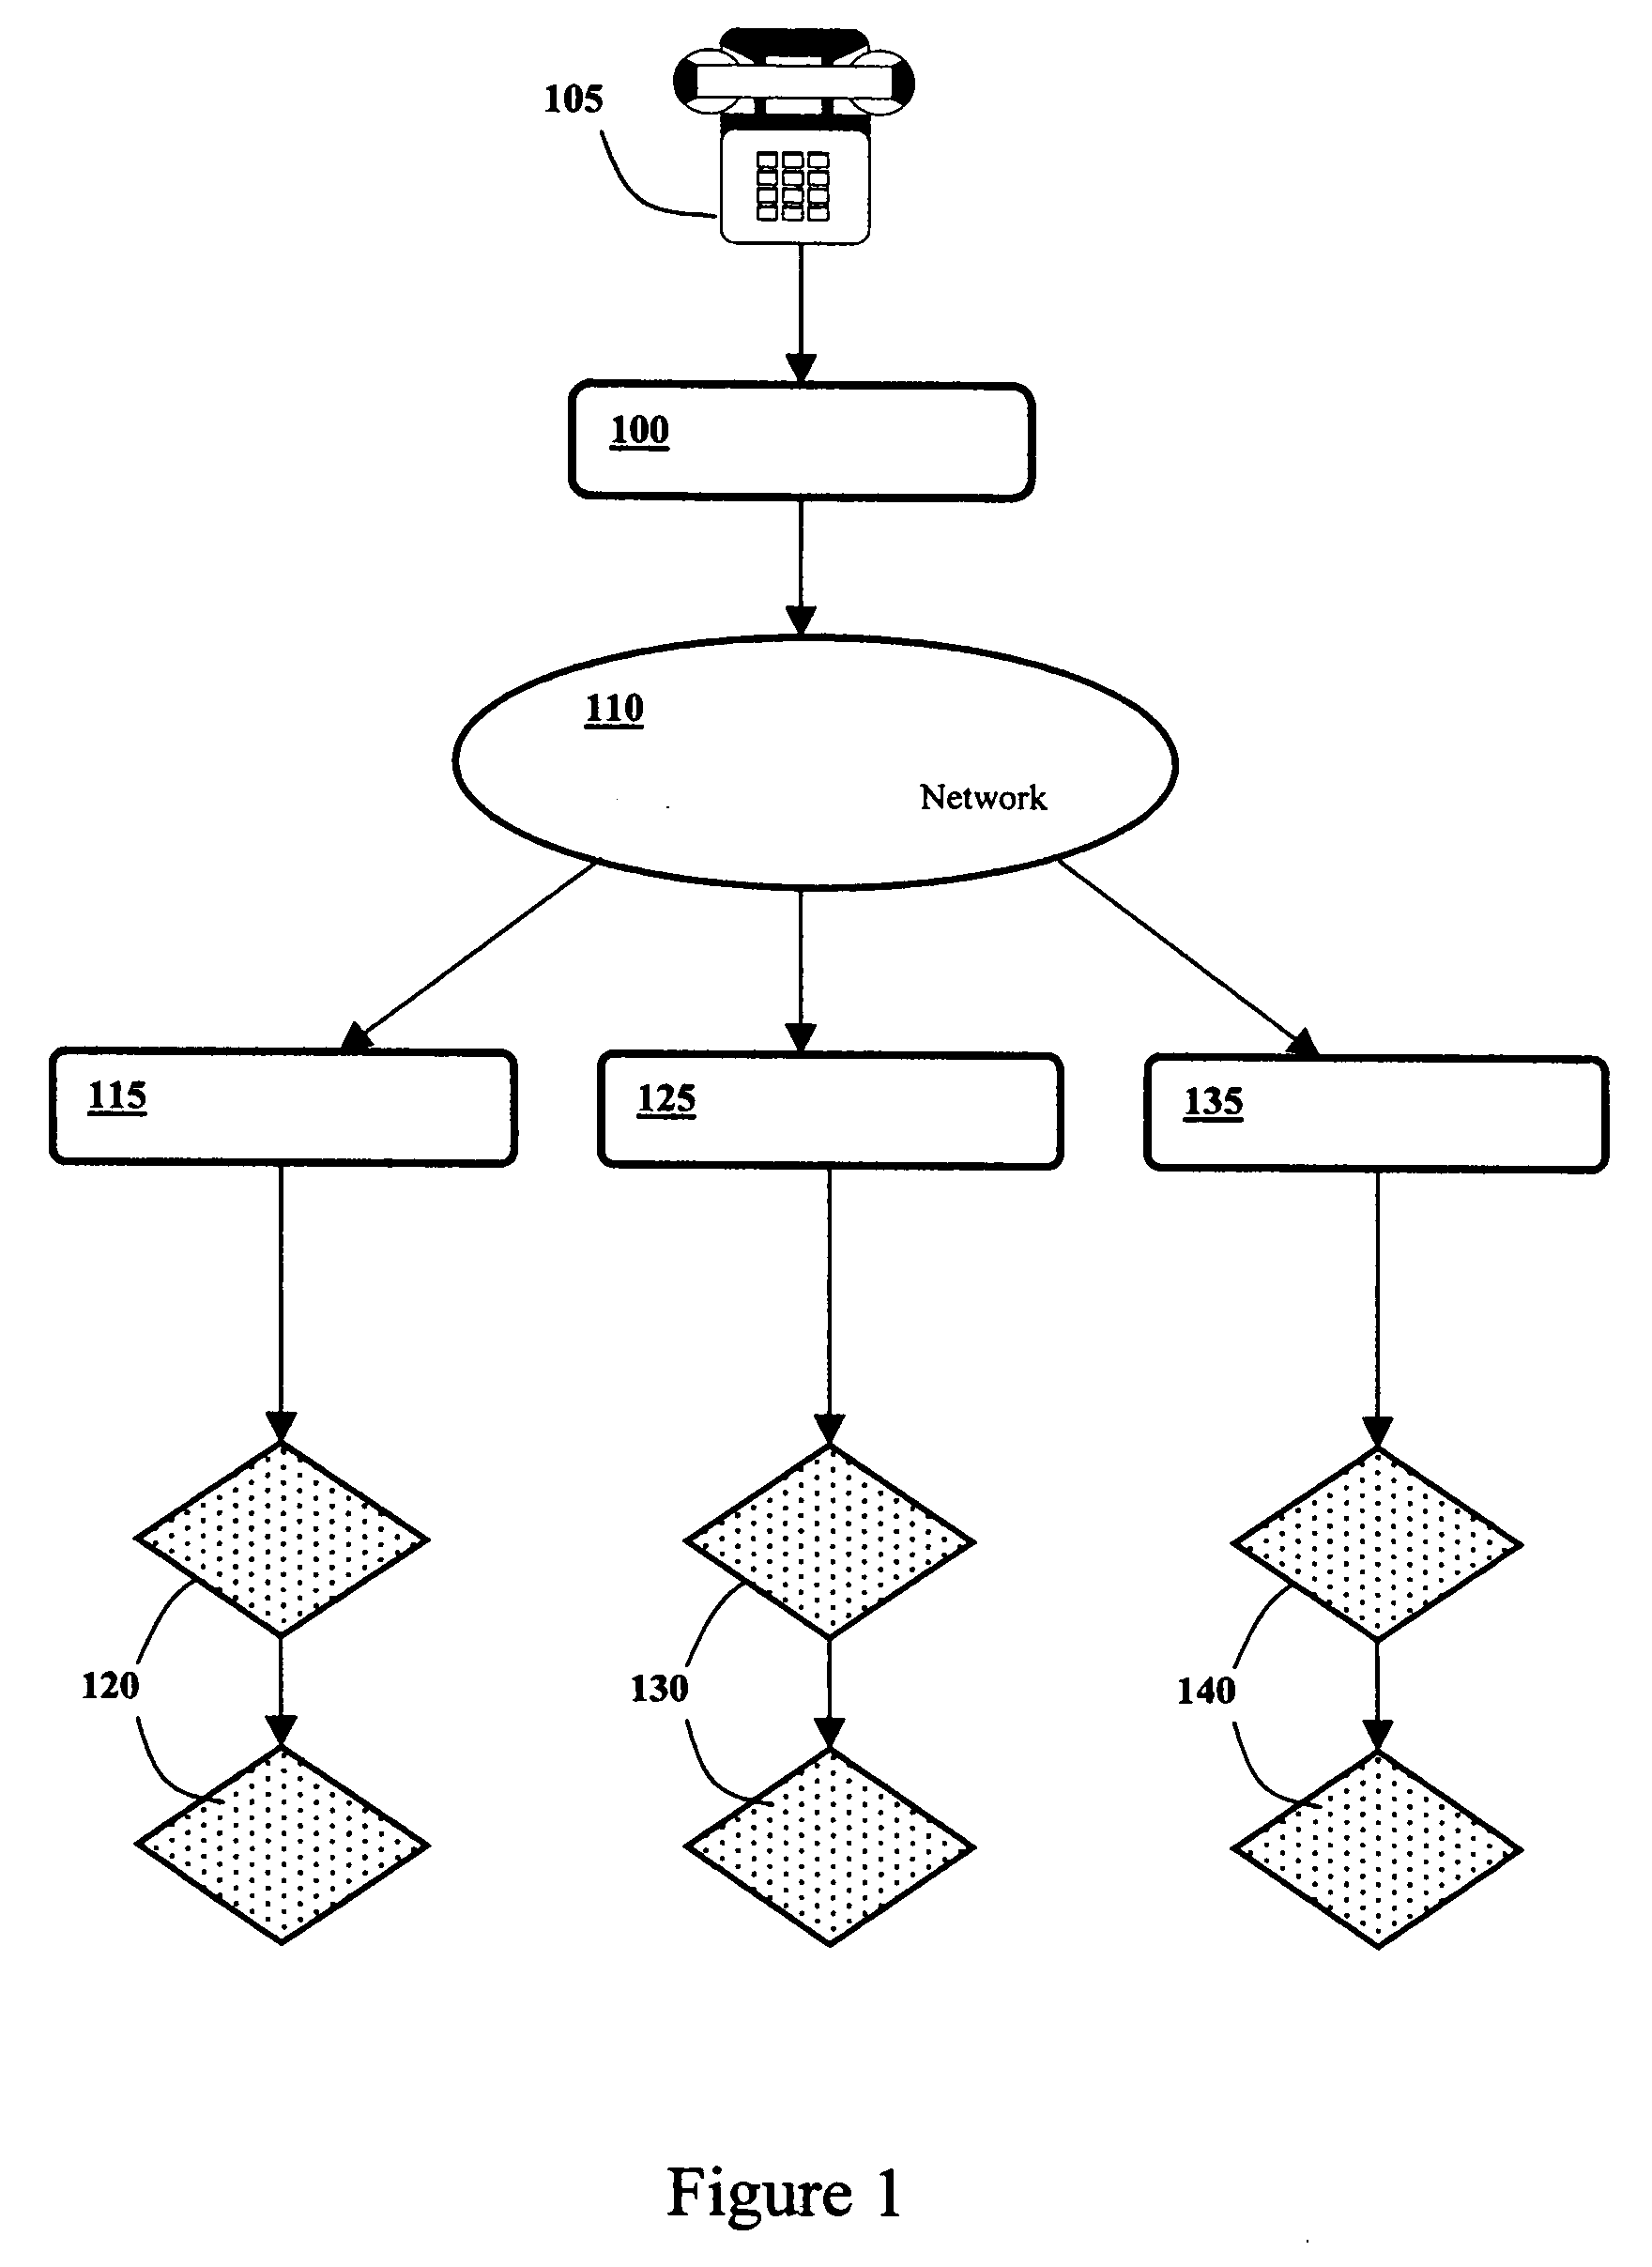 Communication system with distributed intelligence